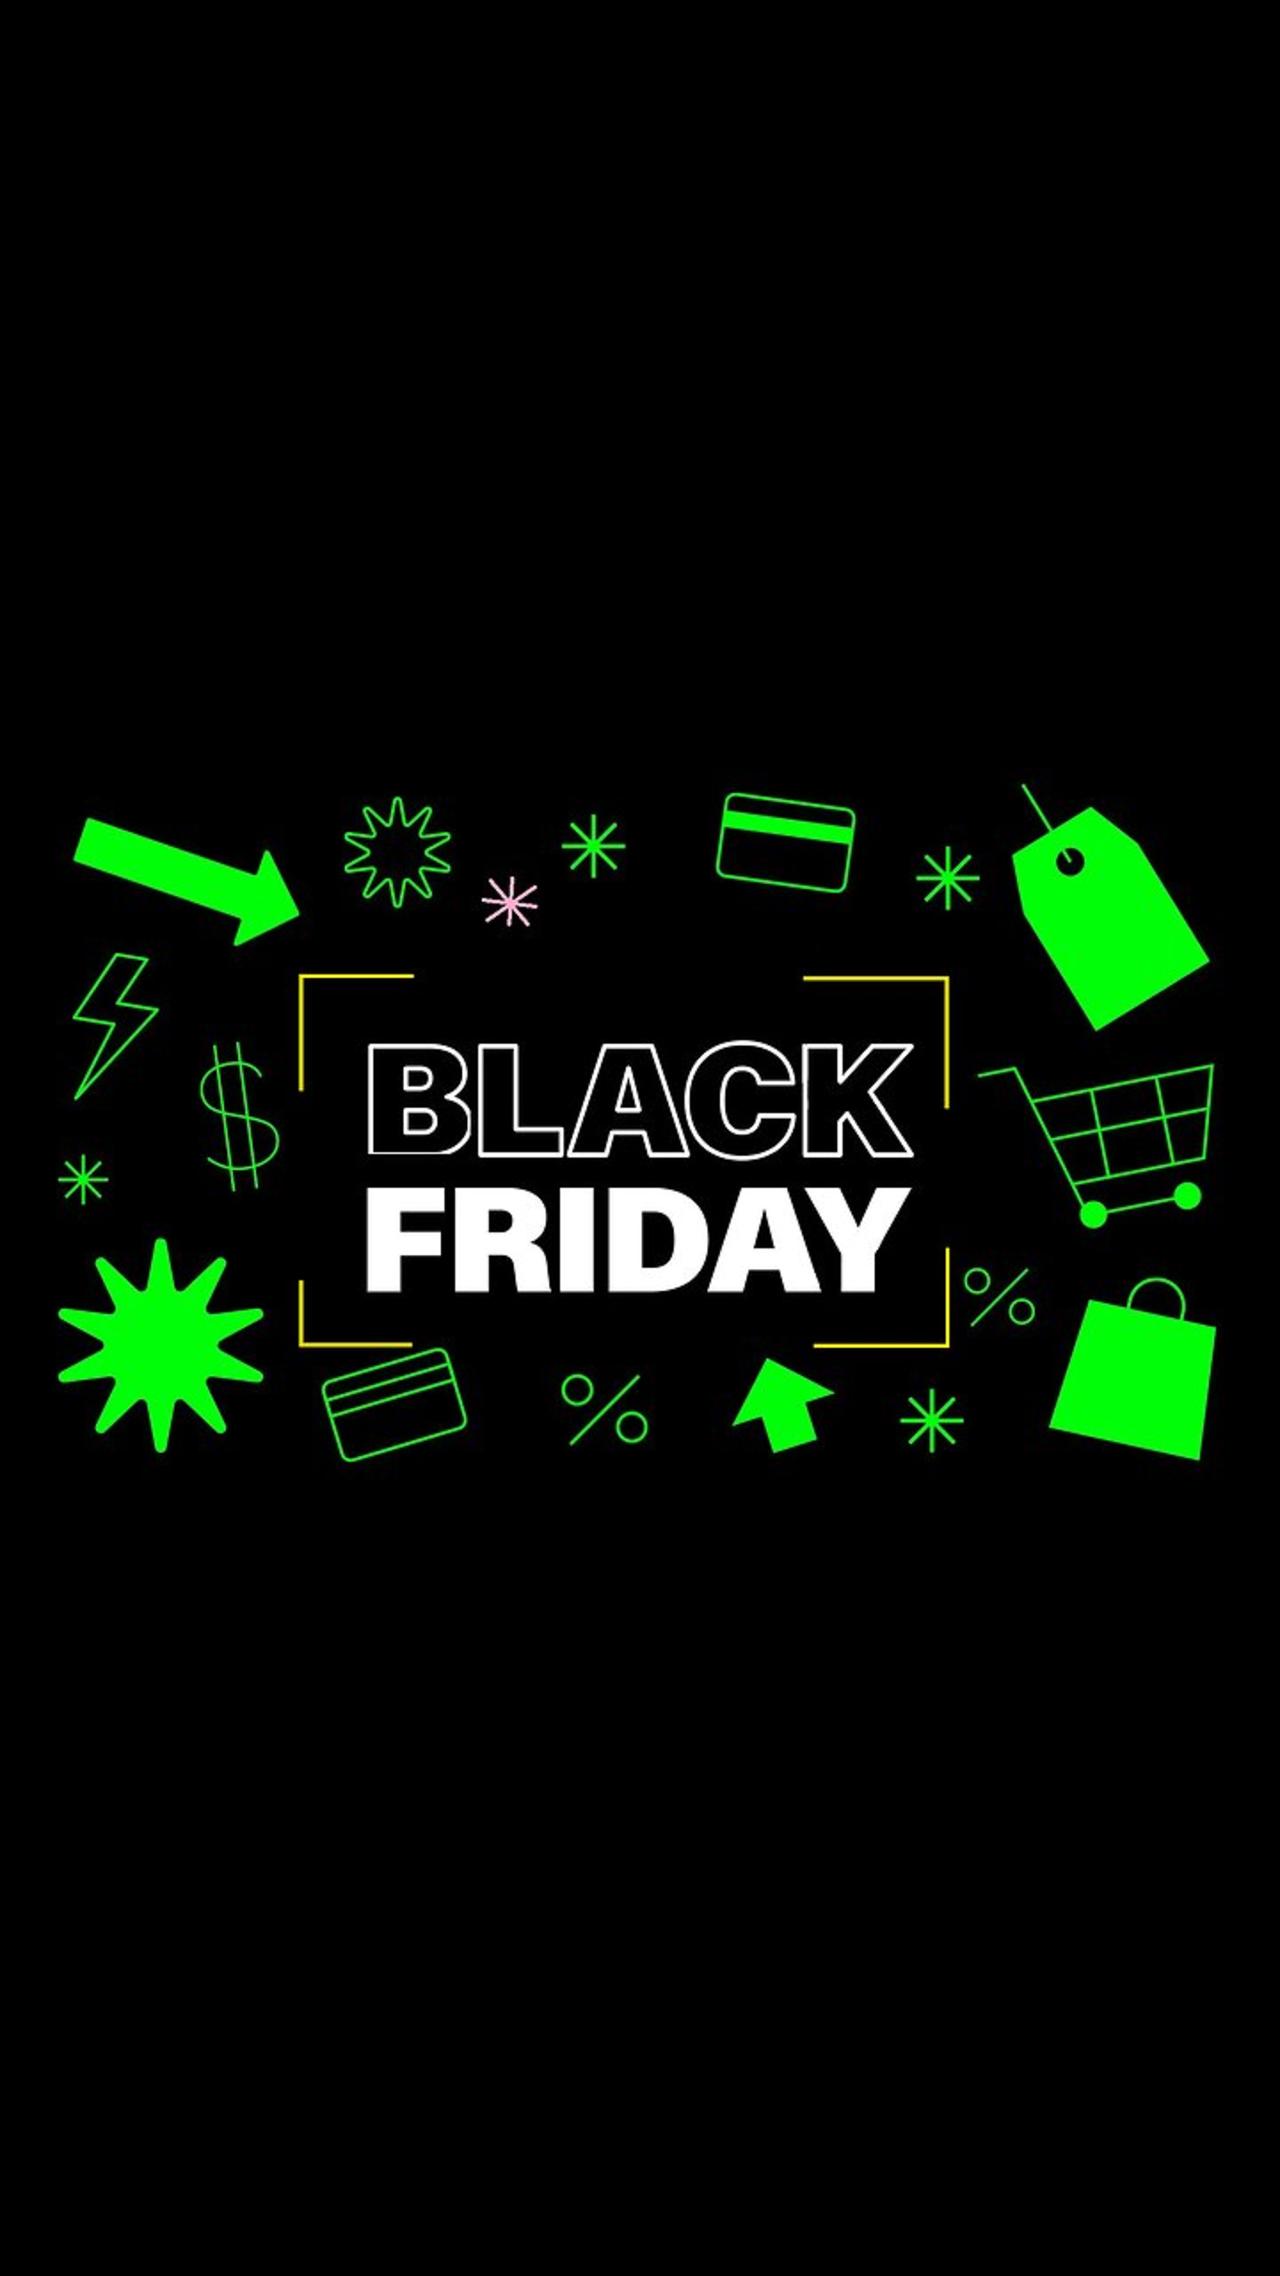 What was the intended feeling that BLACK FRIDAY was actually supposed to give? DEAL